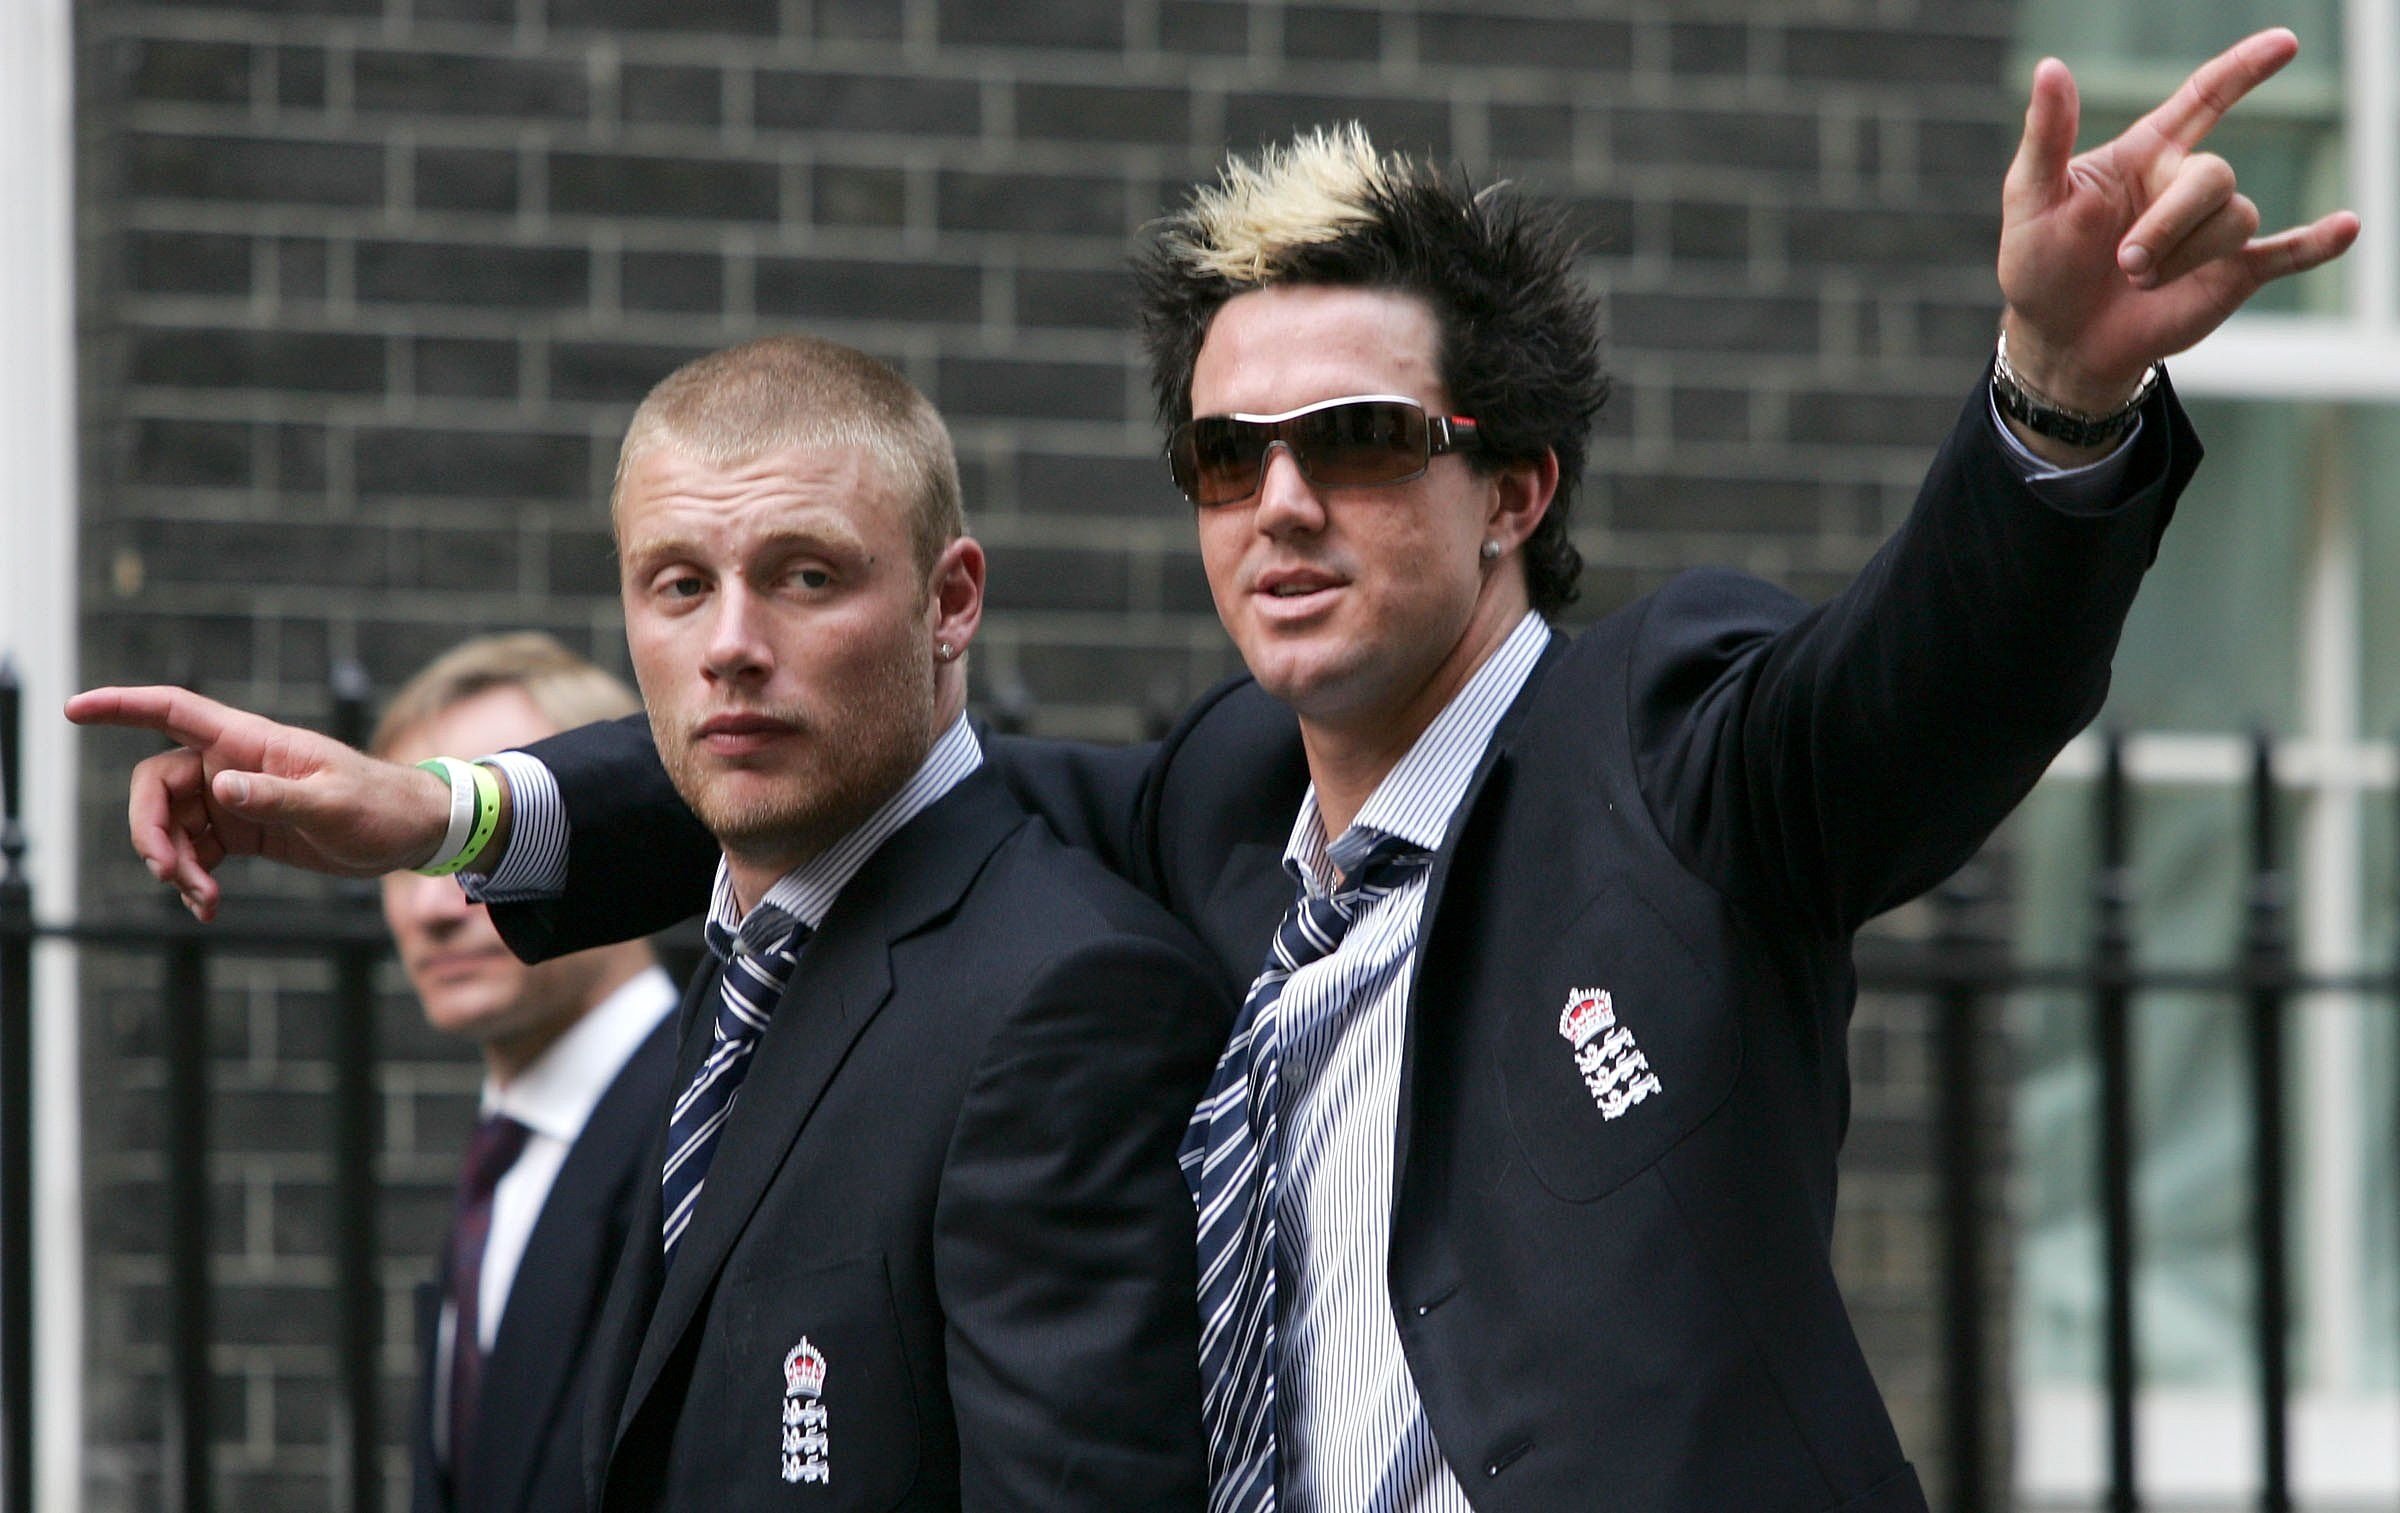 England cricketers Kevin Pietersen, right, and Andrew Flintoff arrive at 10 Downing Street to meet Prime Minister Tony Blair in London, Tuesday Sept, 13, 2005. (AP Photo/Sergio Dionisio)